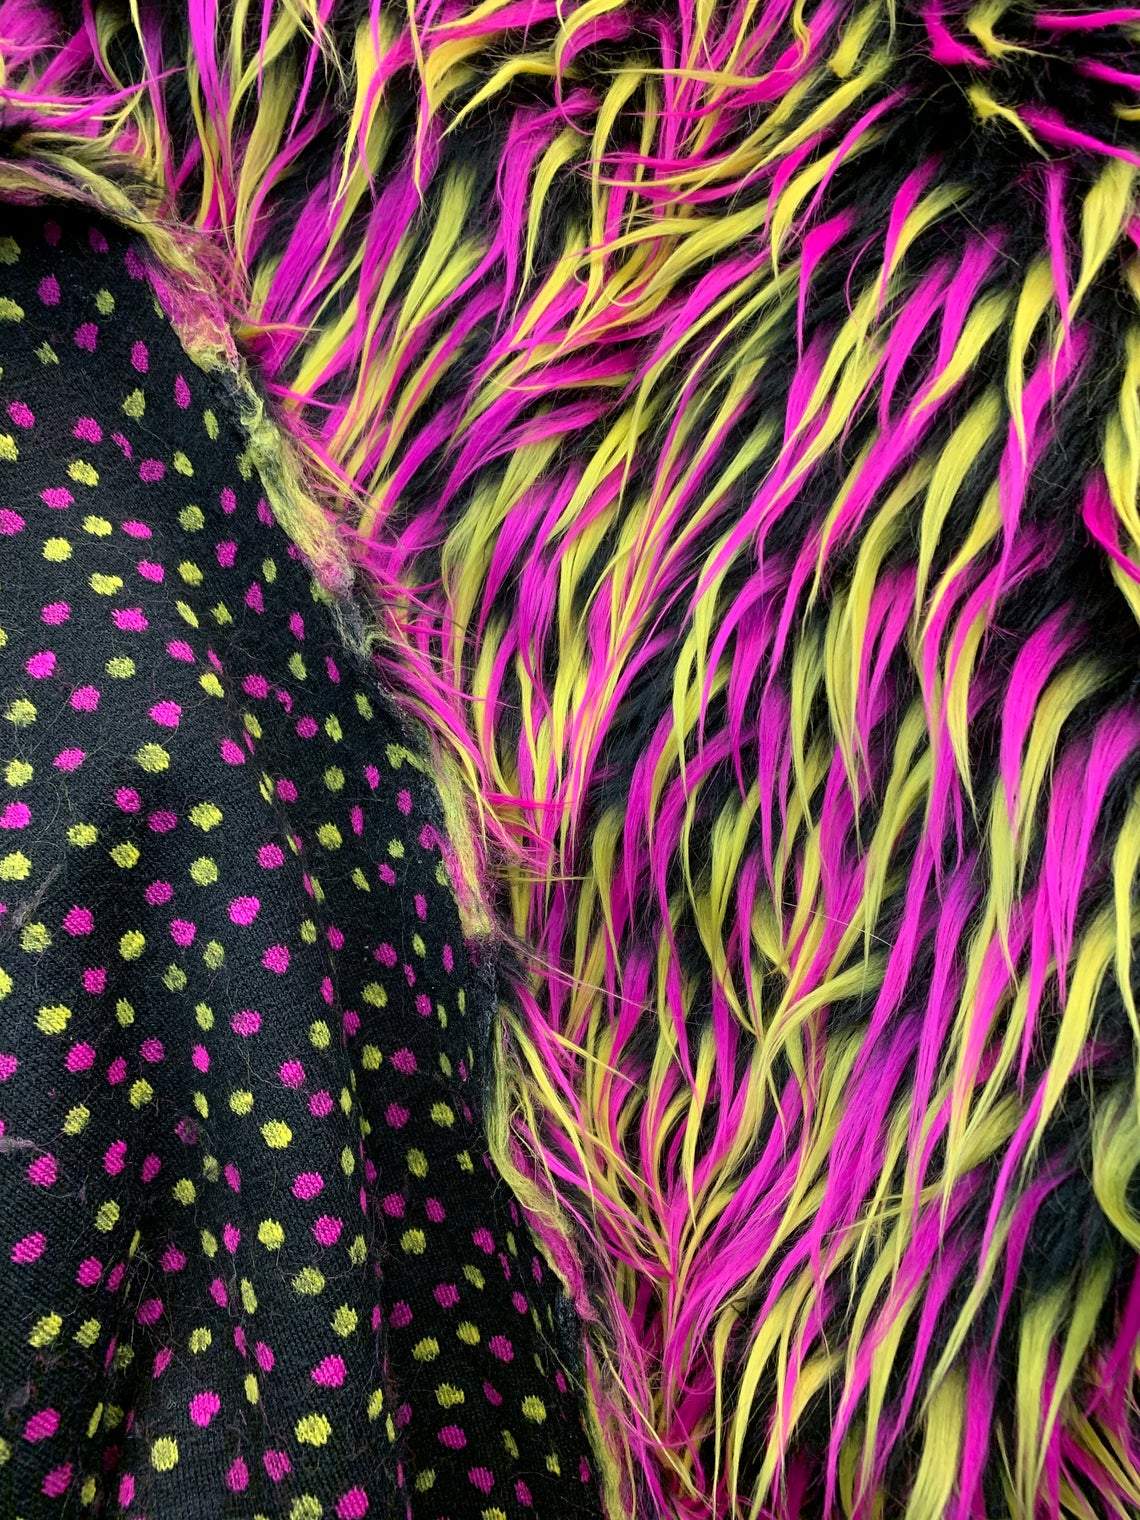 3 Tone Long Pile Design 60 Inches Wide Faux Fur Fake Fabric Yellow Hot Pink Black